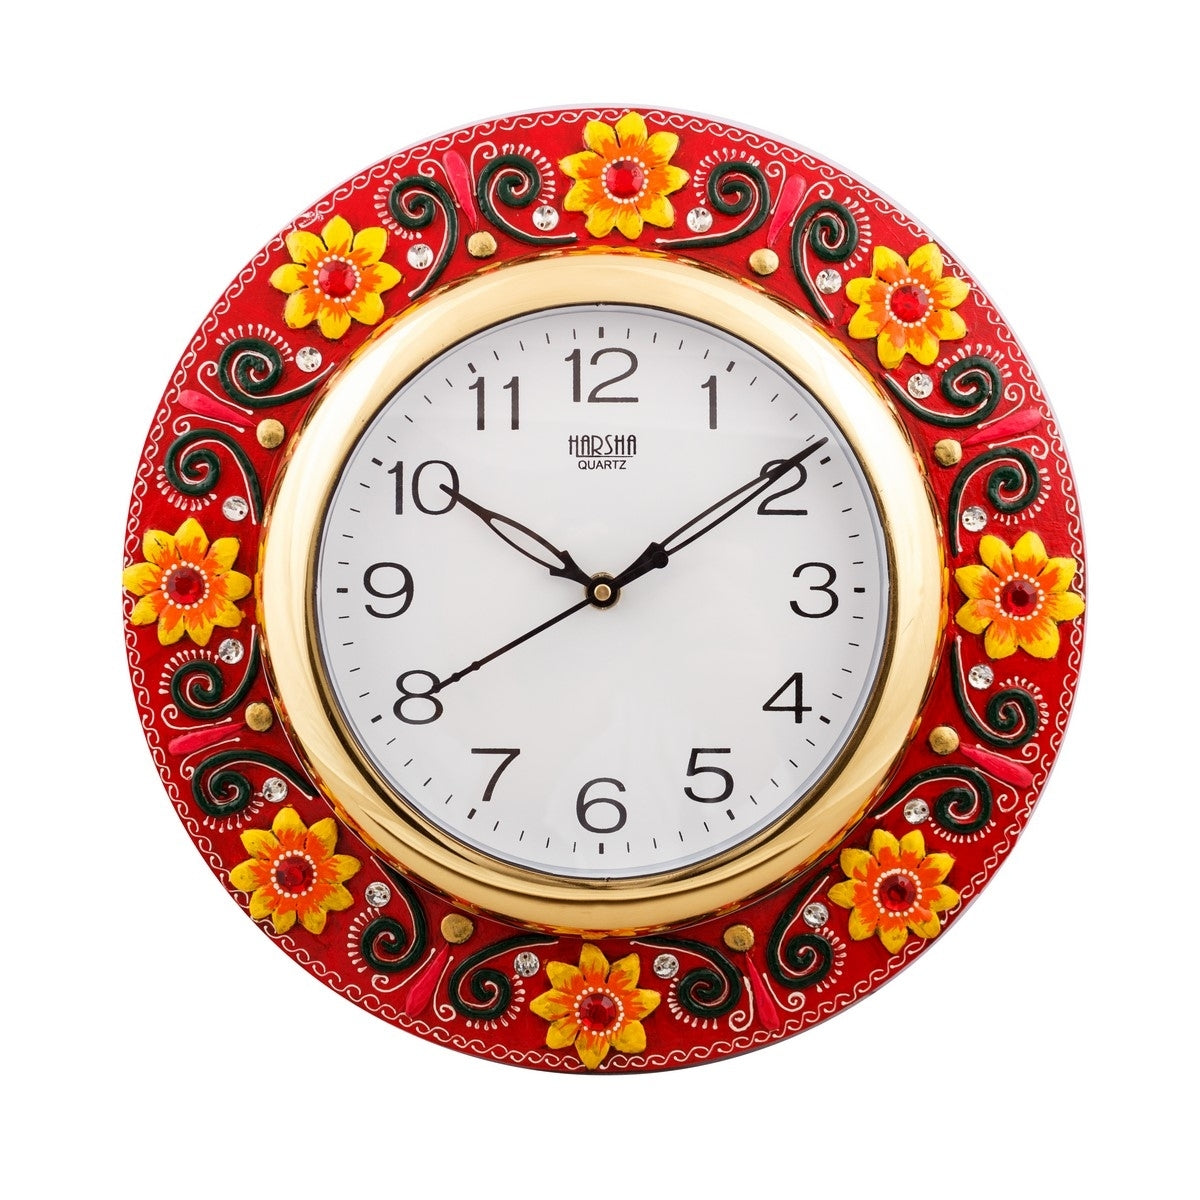 Fine Crafted Florid Papier-Mache Wooden Handcrafted Wall Clock